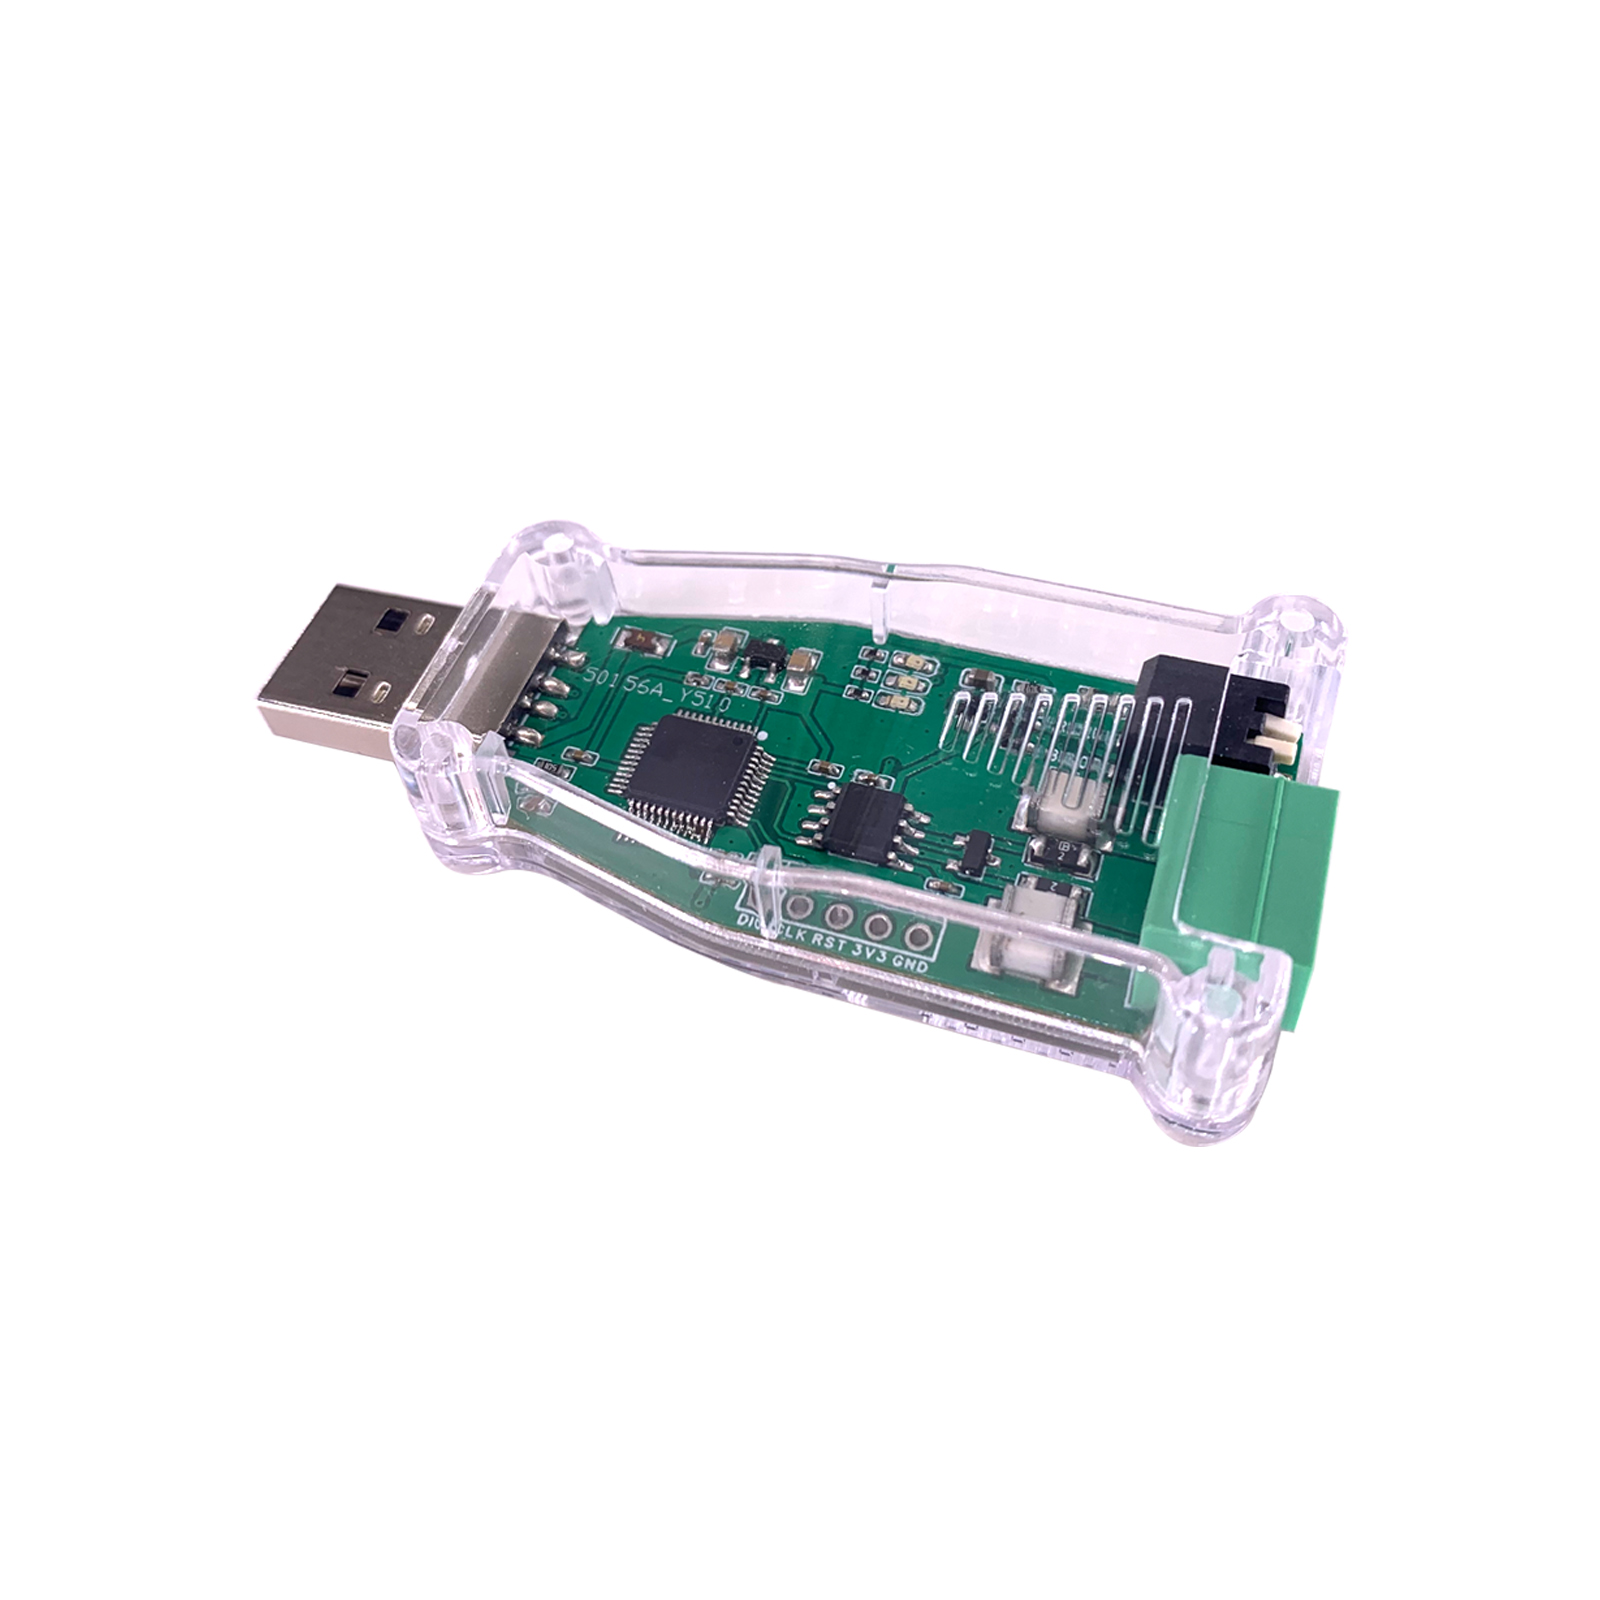 SH-C31A USB to CAN Adapter with FD Support based on Canable 2.0